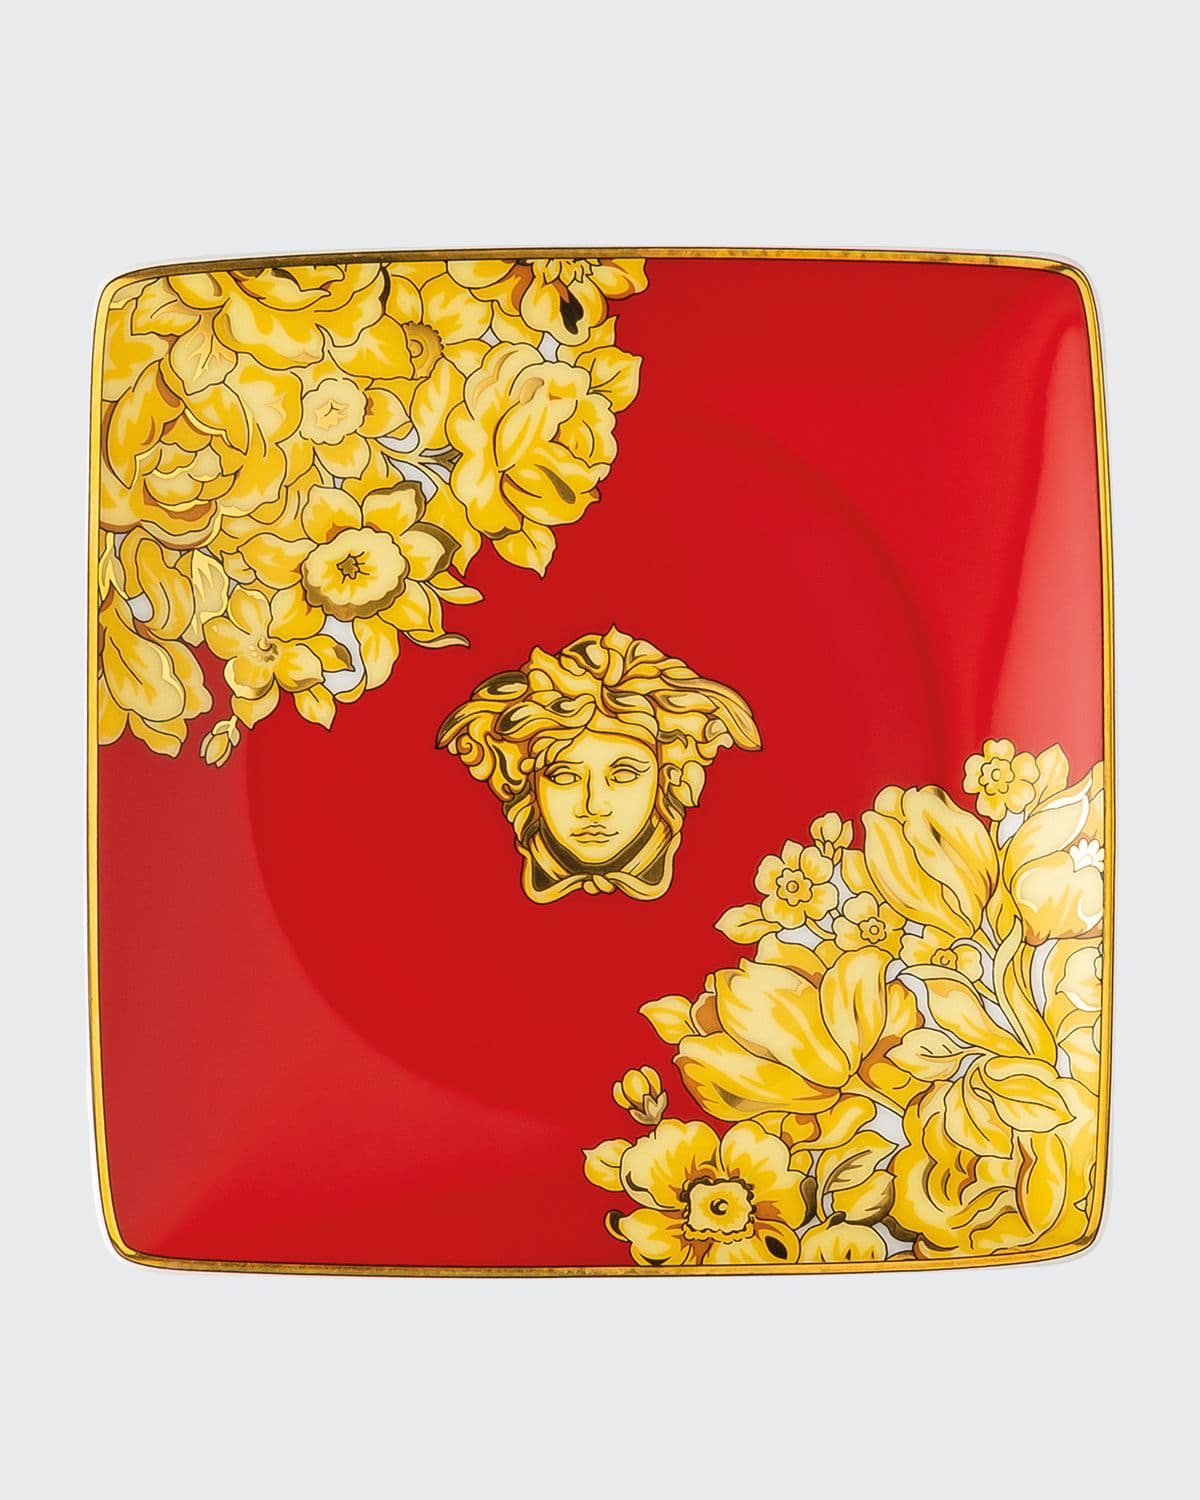 Versace Medusa Rhapsody Canape Dish In Red